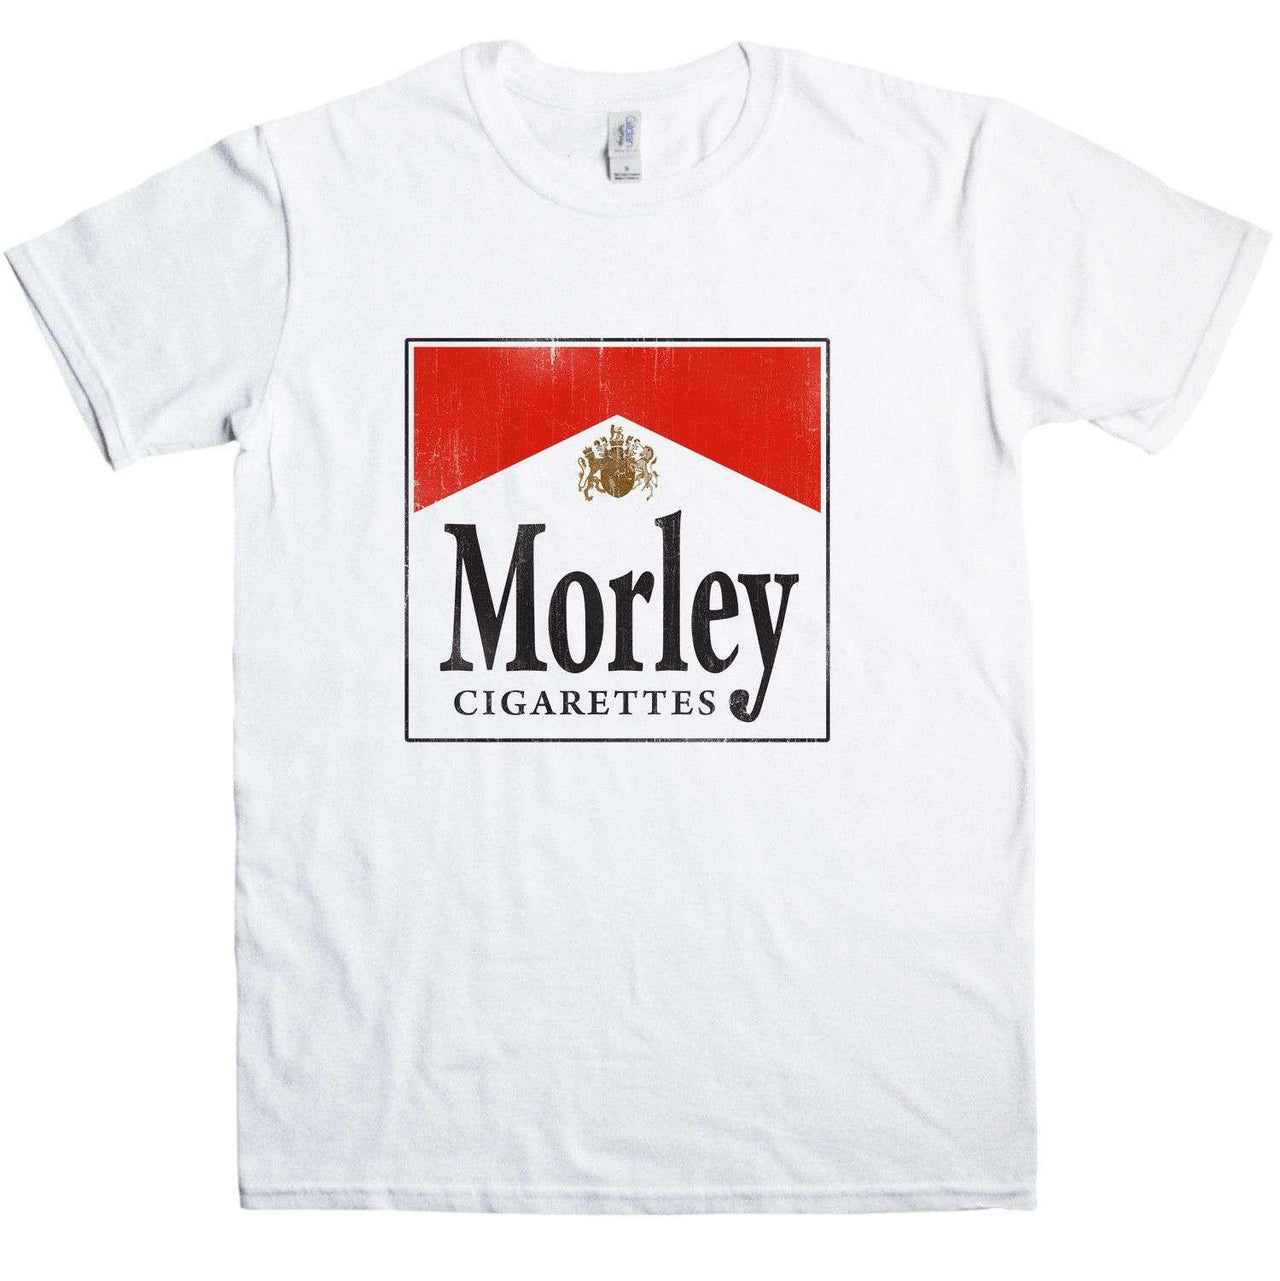 Morley Cigarettes Unisex T-Shirt For Men And Women, Inspired By The X Files 8Ball